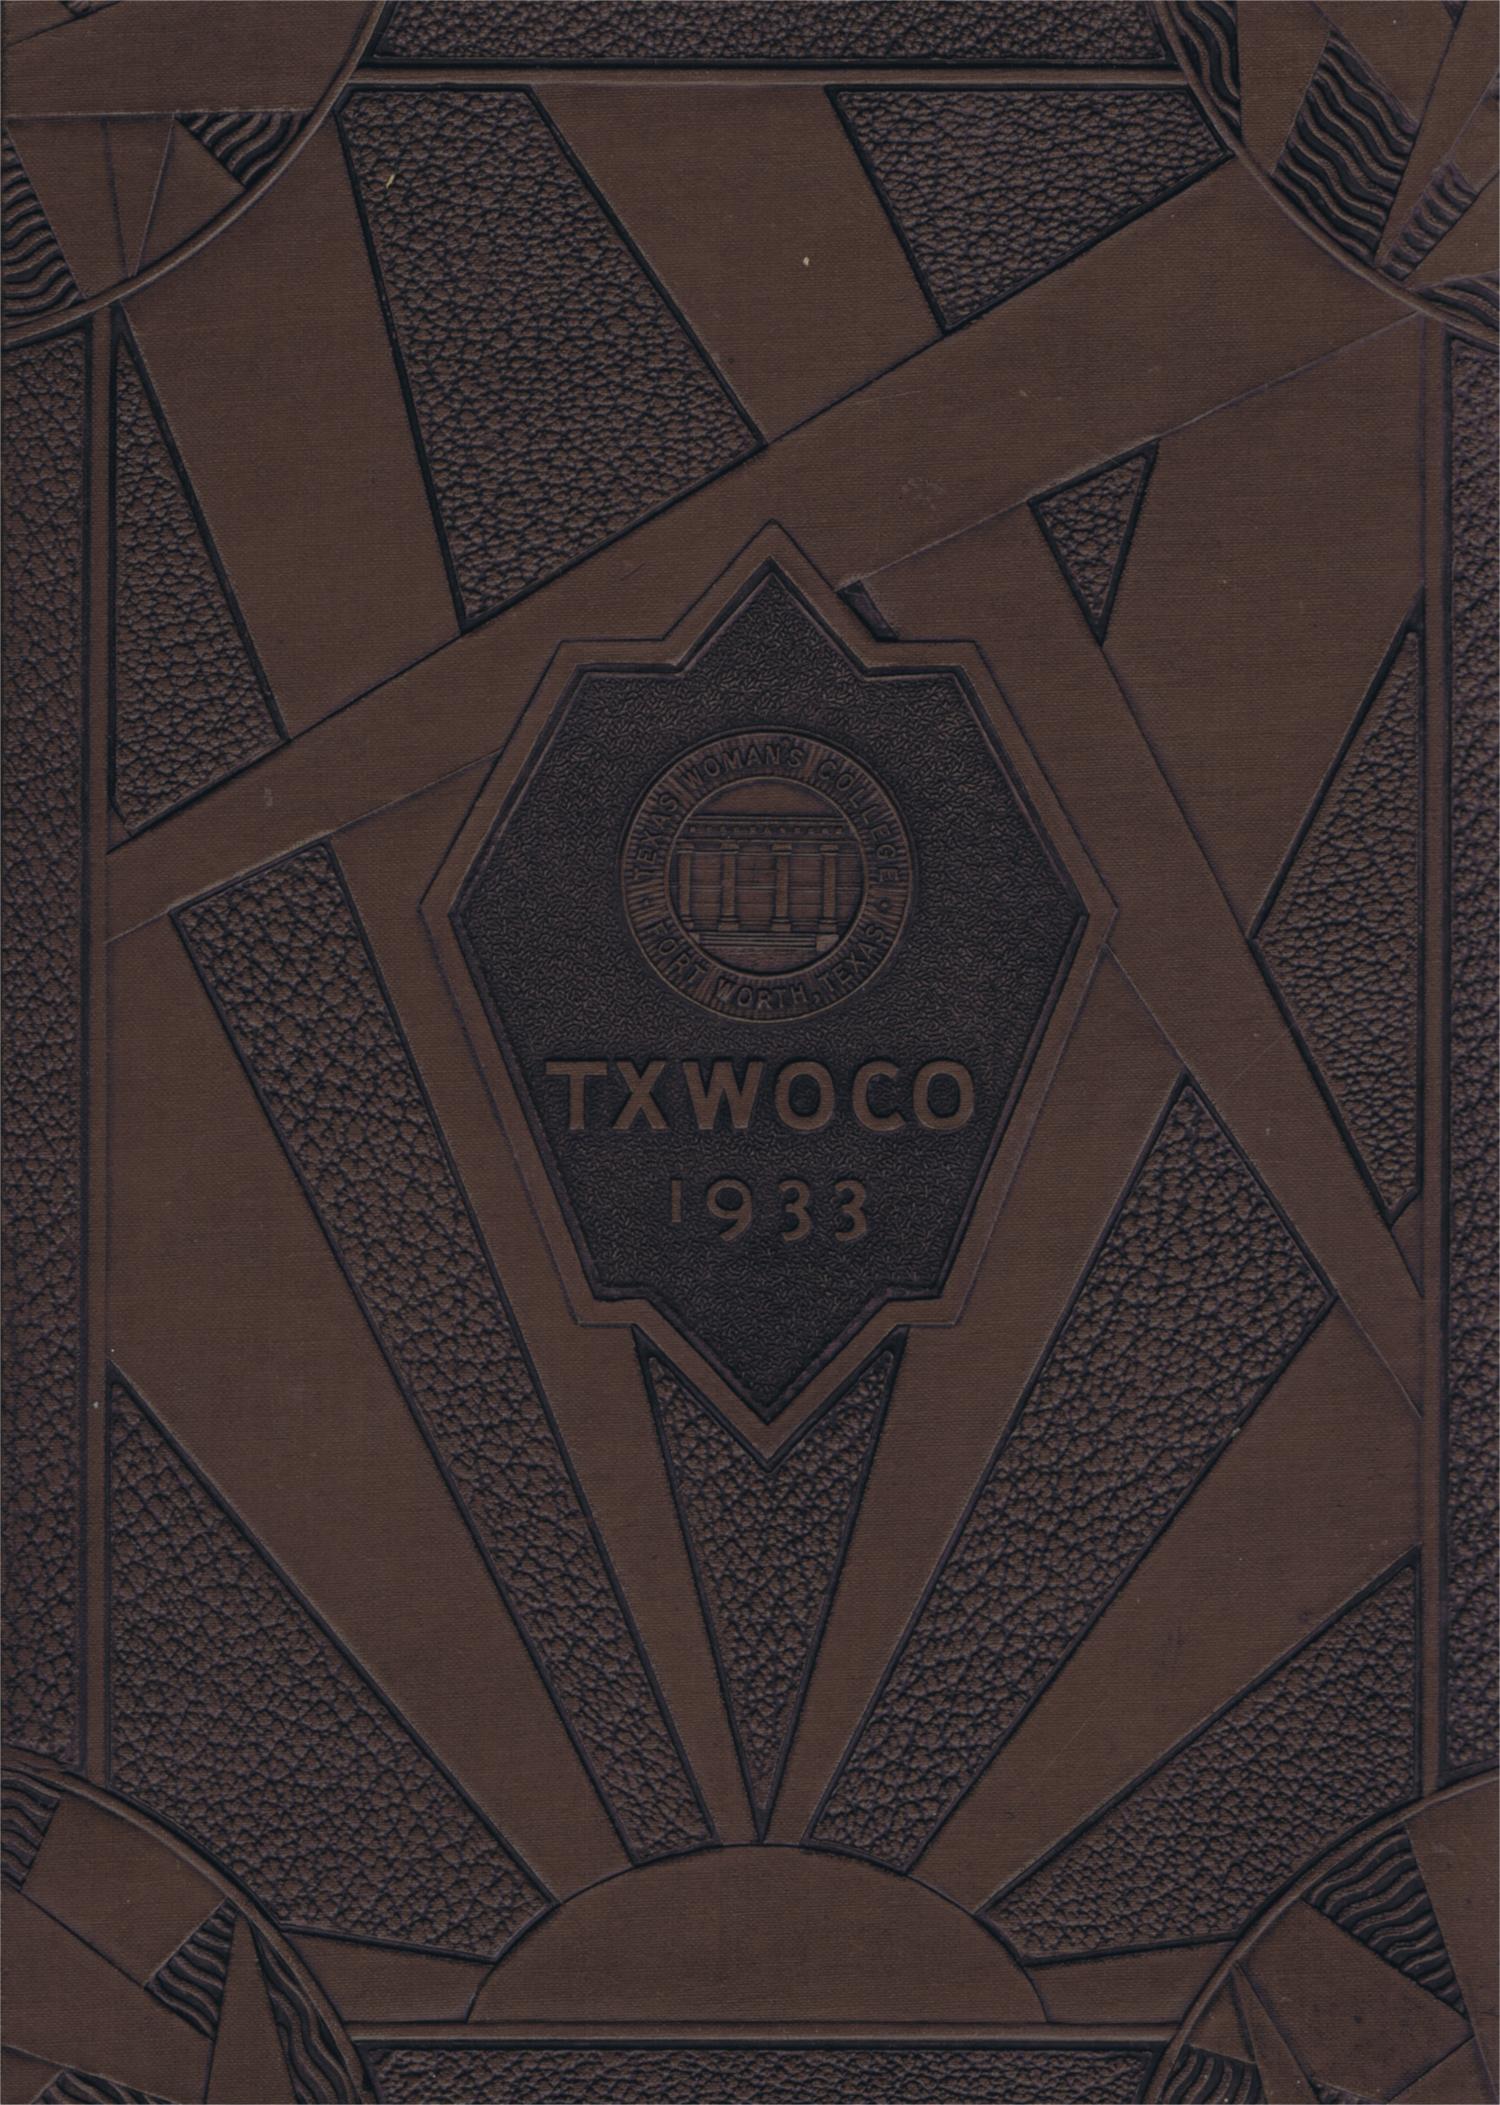 TXWOCO, Yearbook of Texas Woman's College, 1933
                                                
                                                    Front Cover
                                                